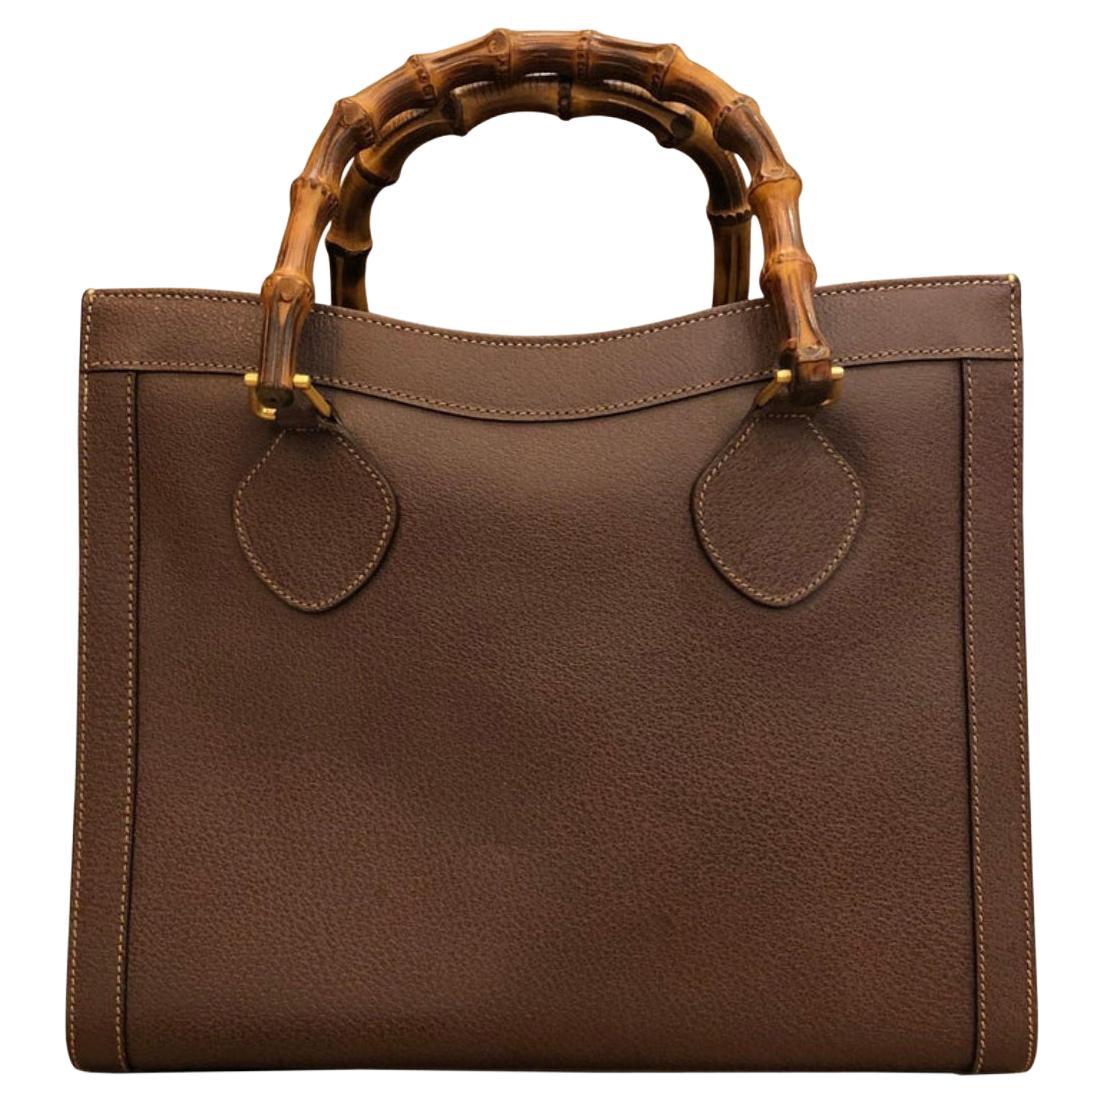 1990s Vintage GUCCI Leather Bamboo Tote Diana Tote Bag Brown (Medium)